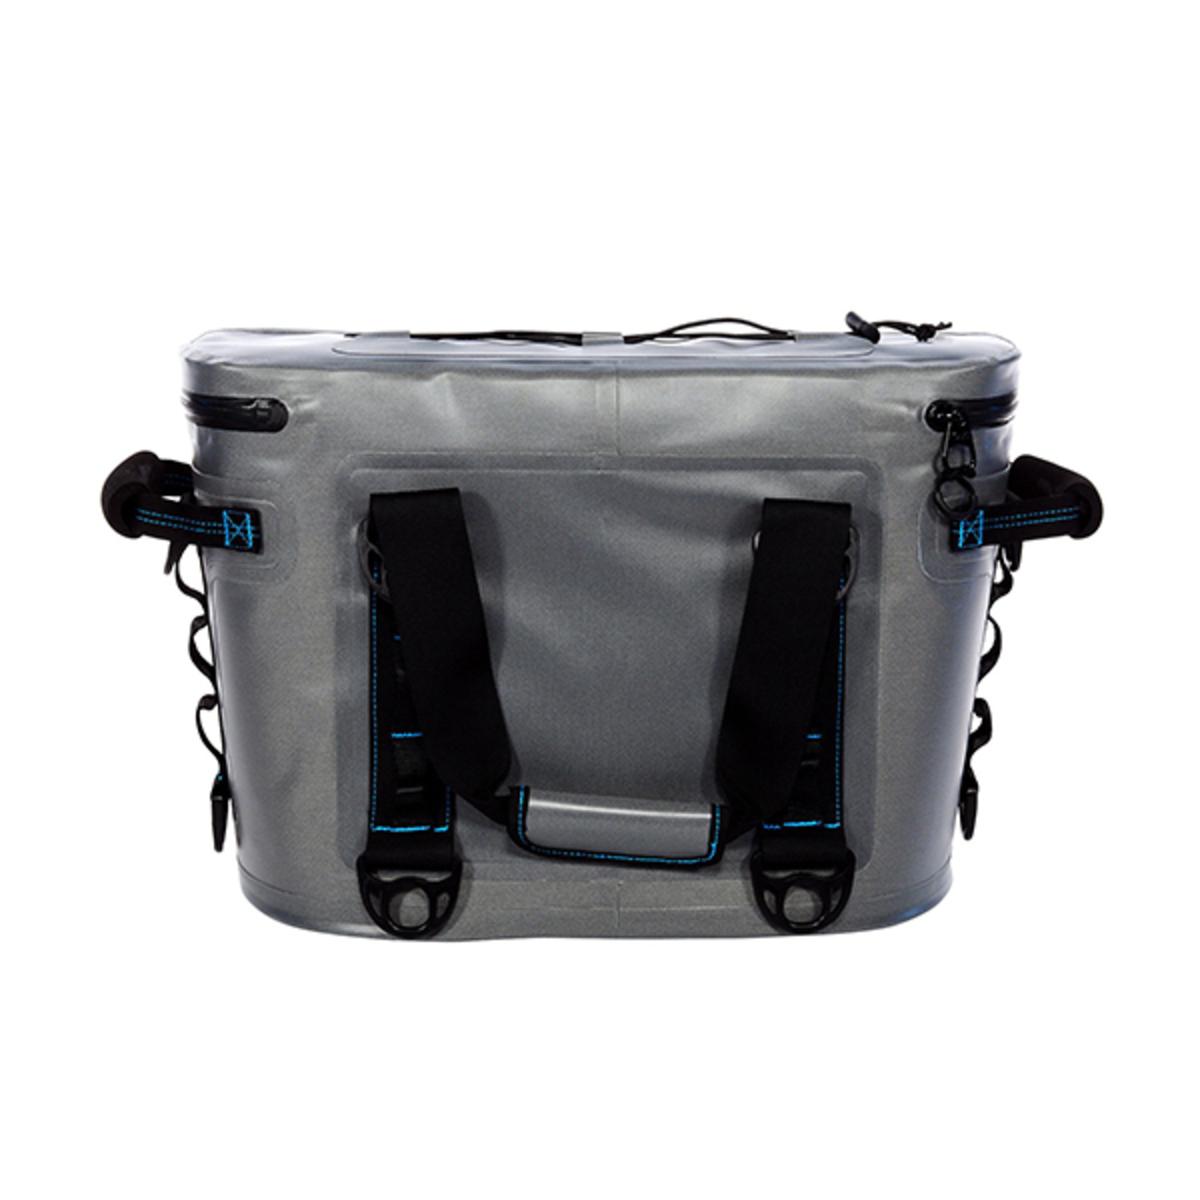 Kysek Rover Soft Bag Ice Chest